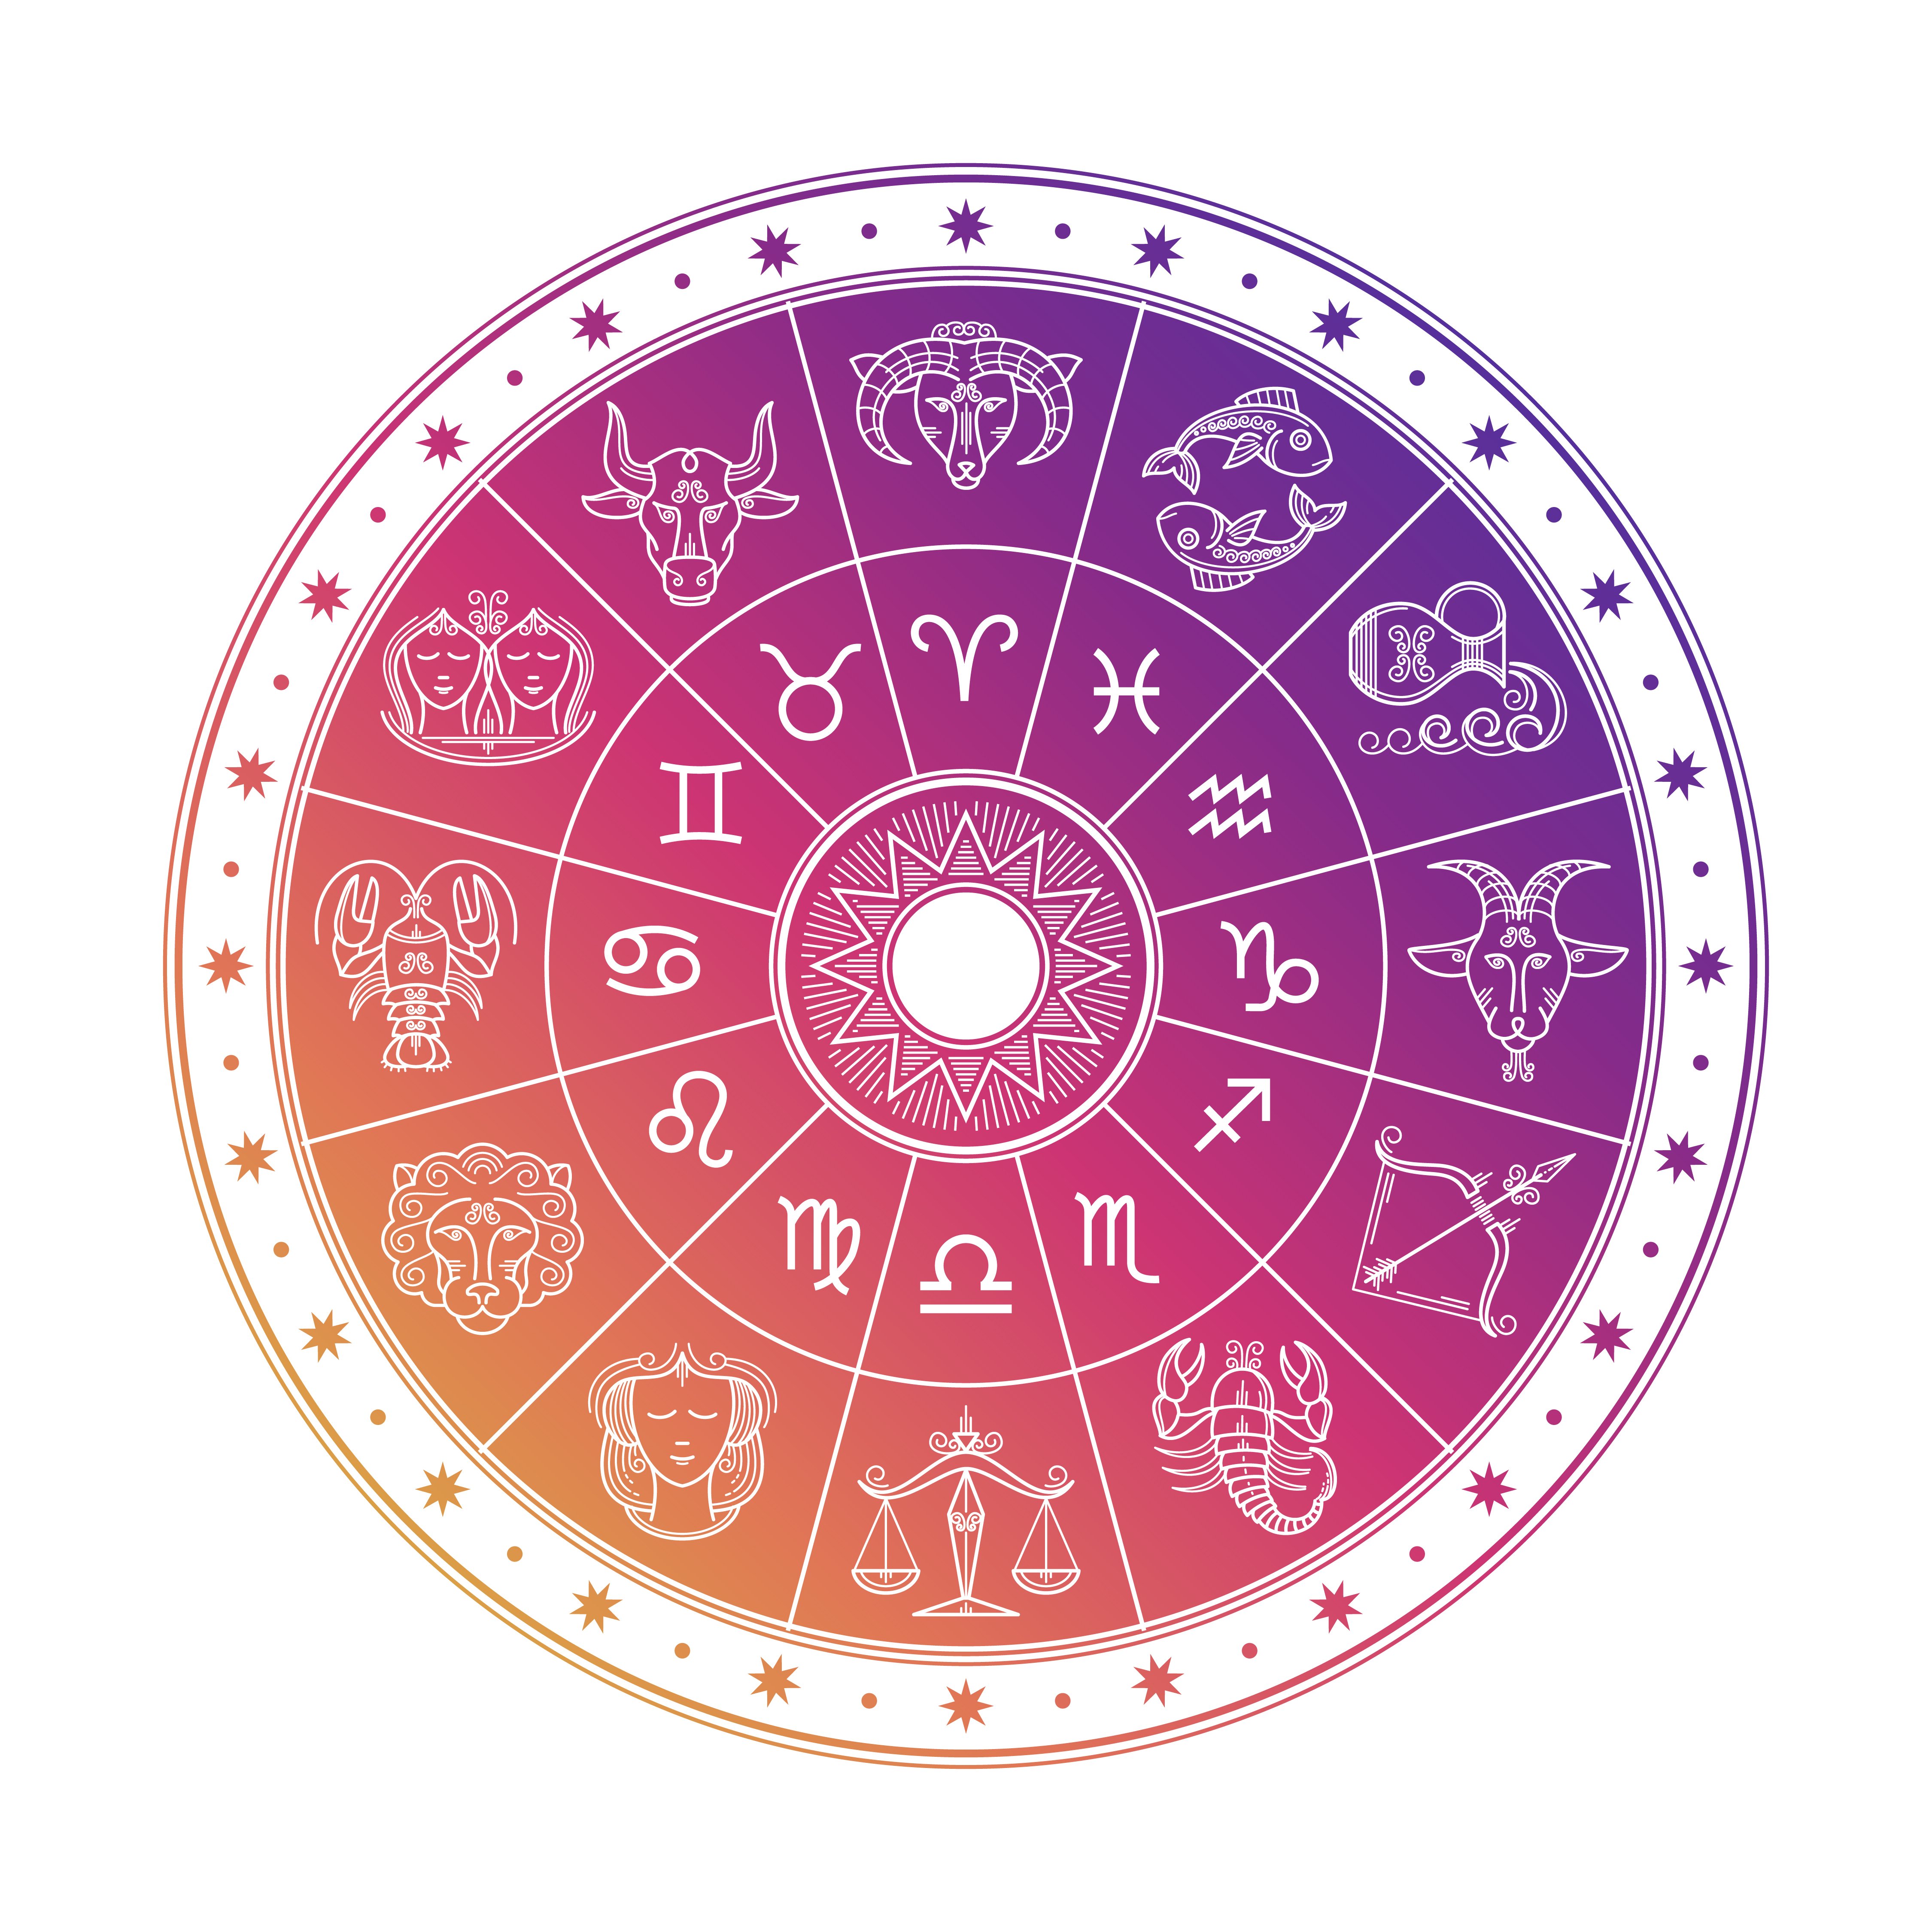 Colorful astrology circle design with horoscope signs isolated on white background | Photo: Shutterstock